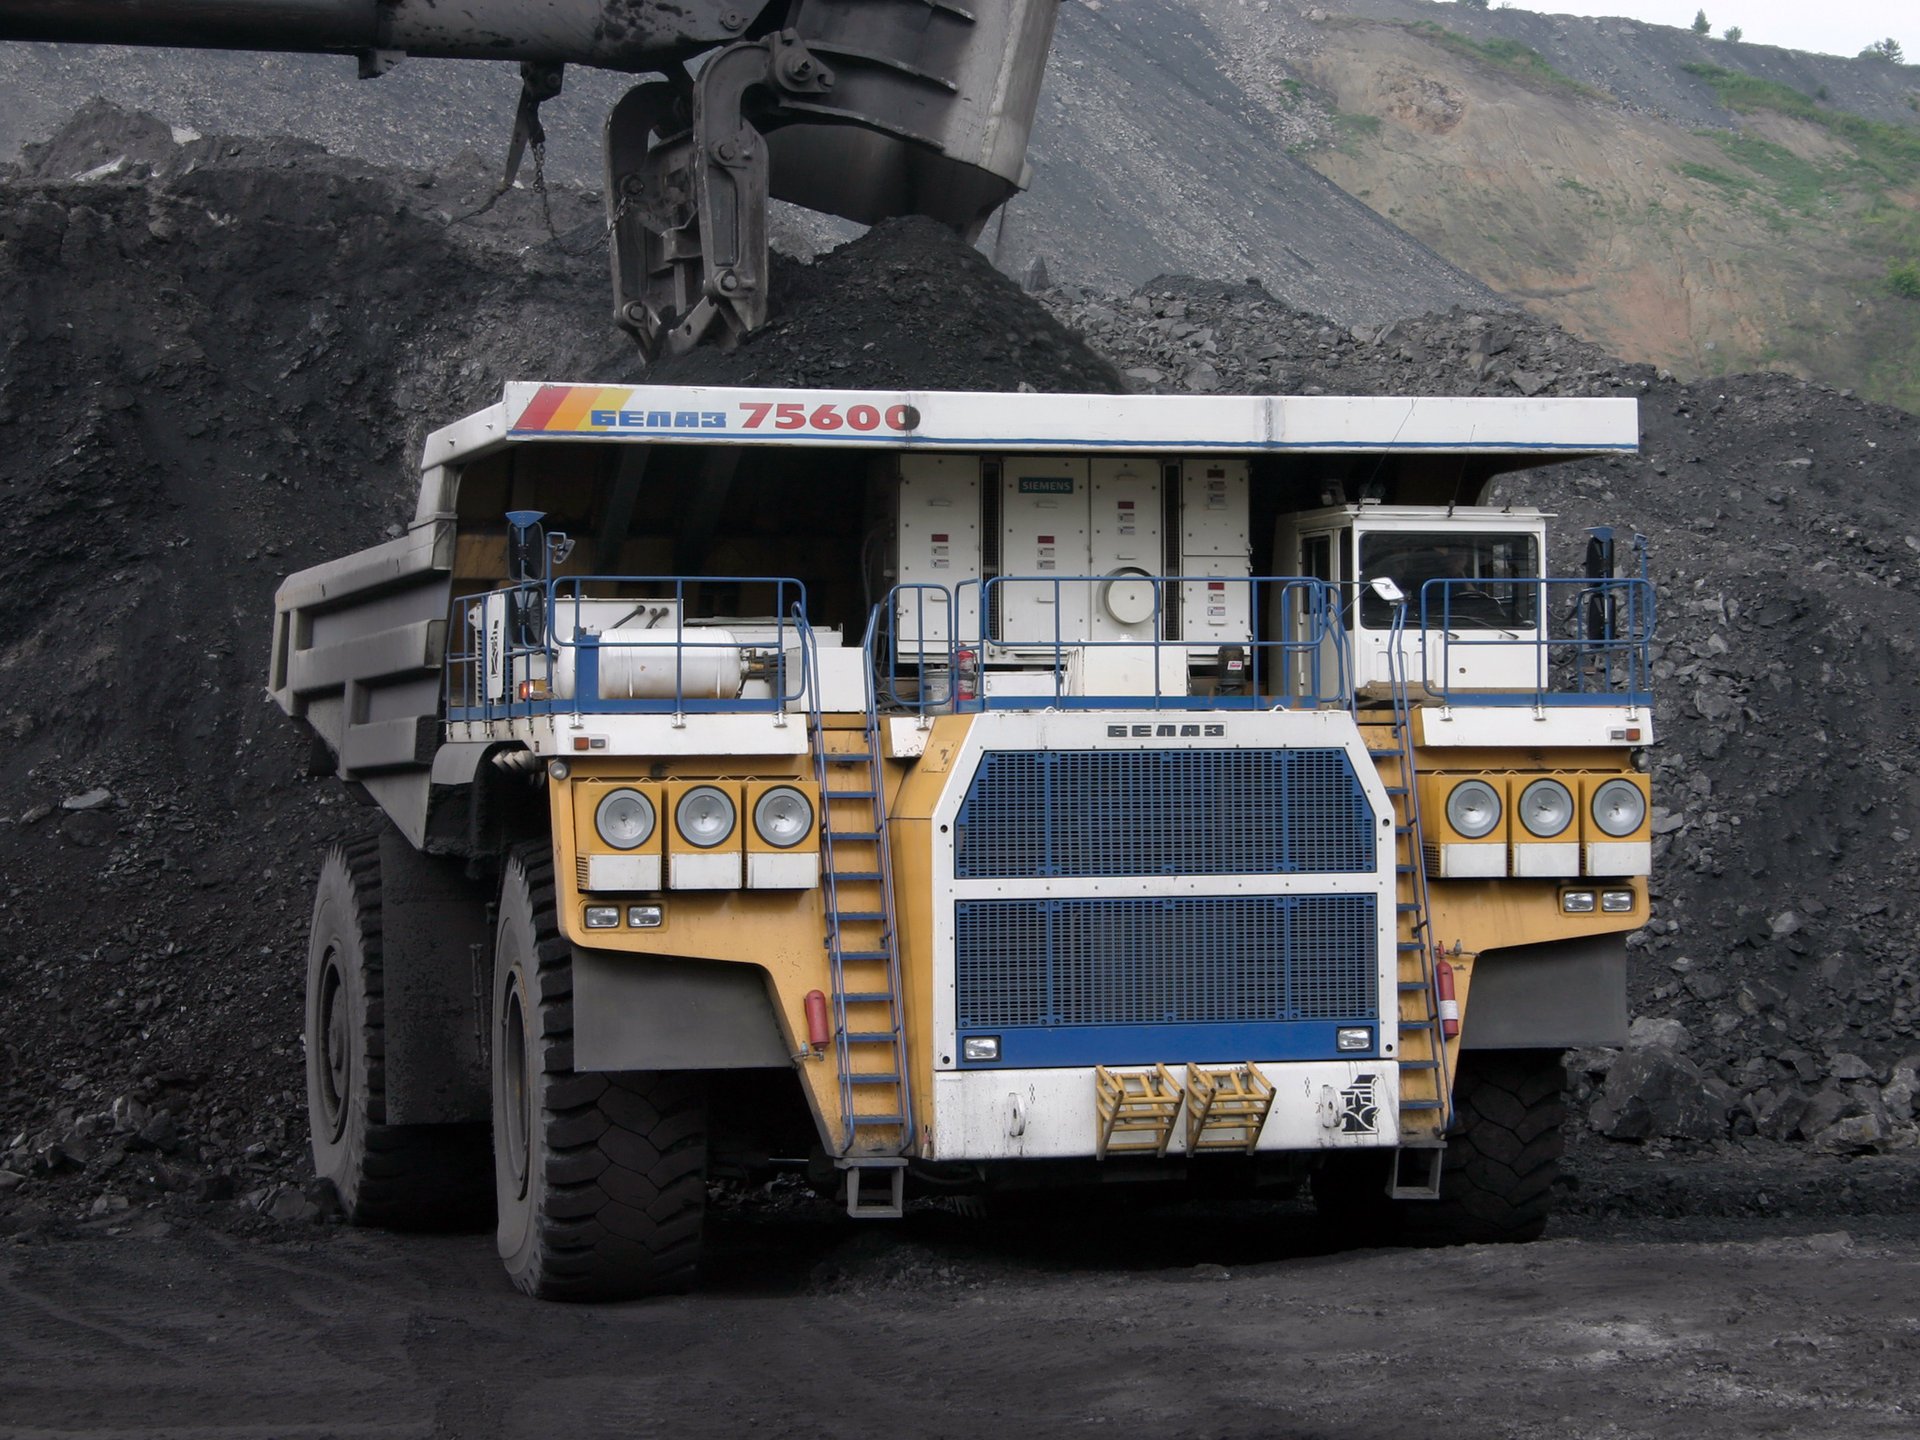 Dump truck in the process of working in coal and dust